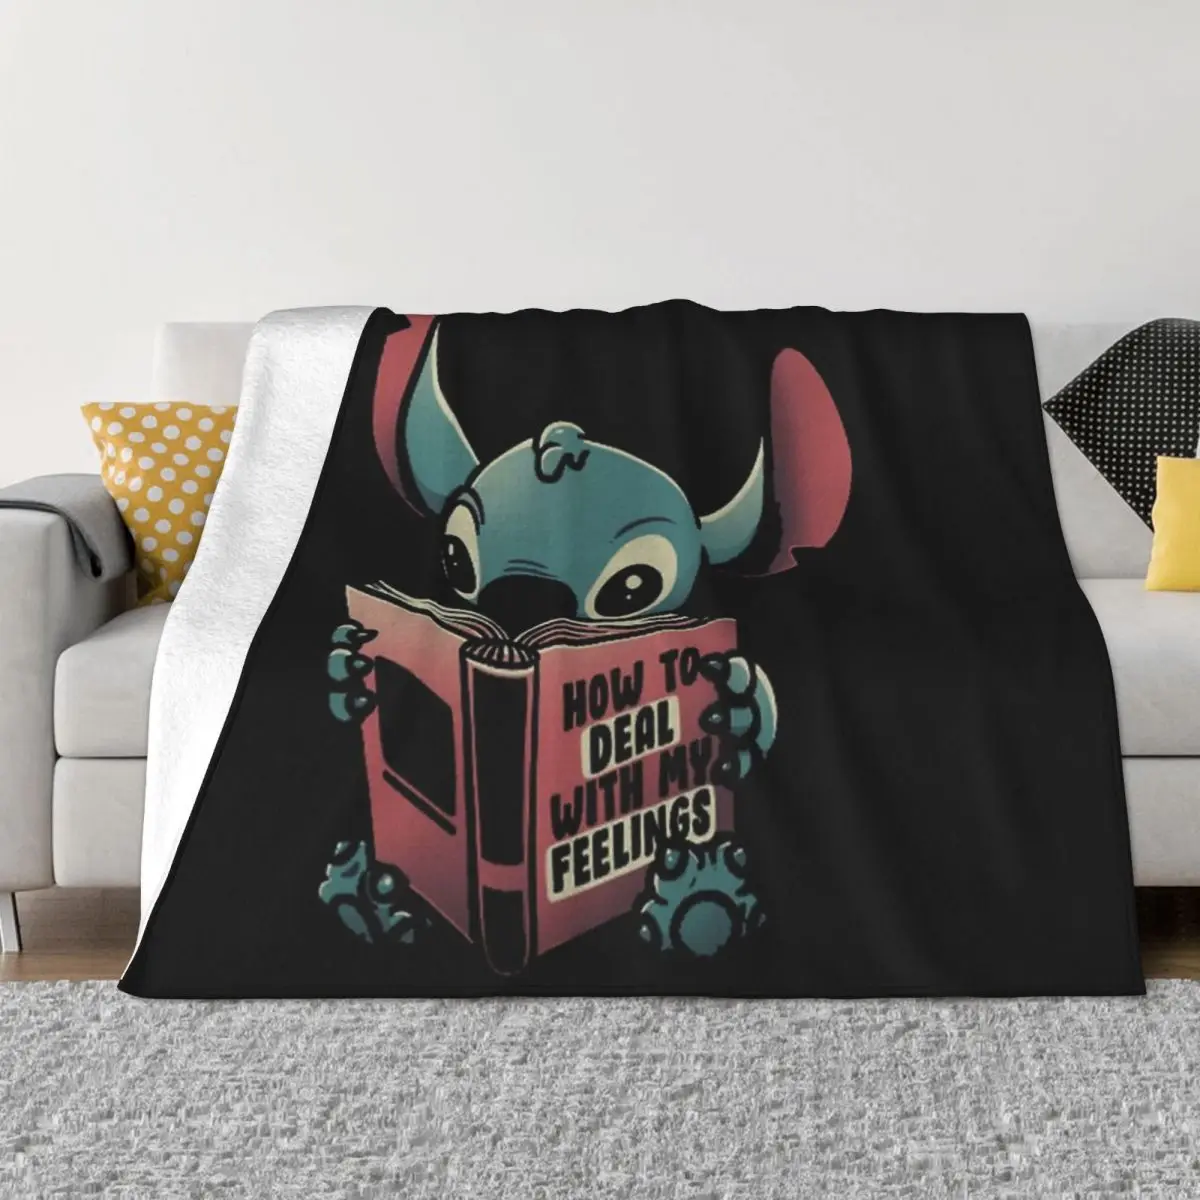 

How to Deal With My Feelings Cute 3D Cartoon Throw Blanket for Living Room Bedroom House Decor Sofa Cover Bedspreads